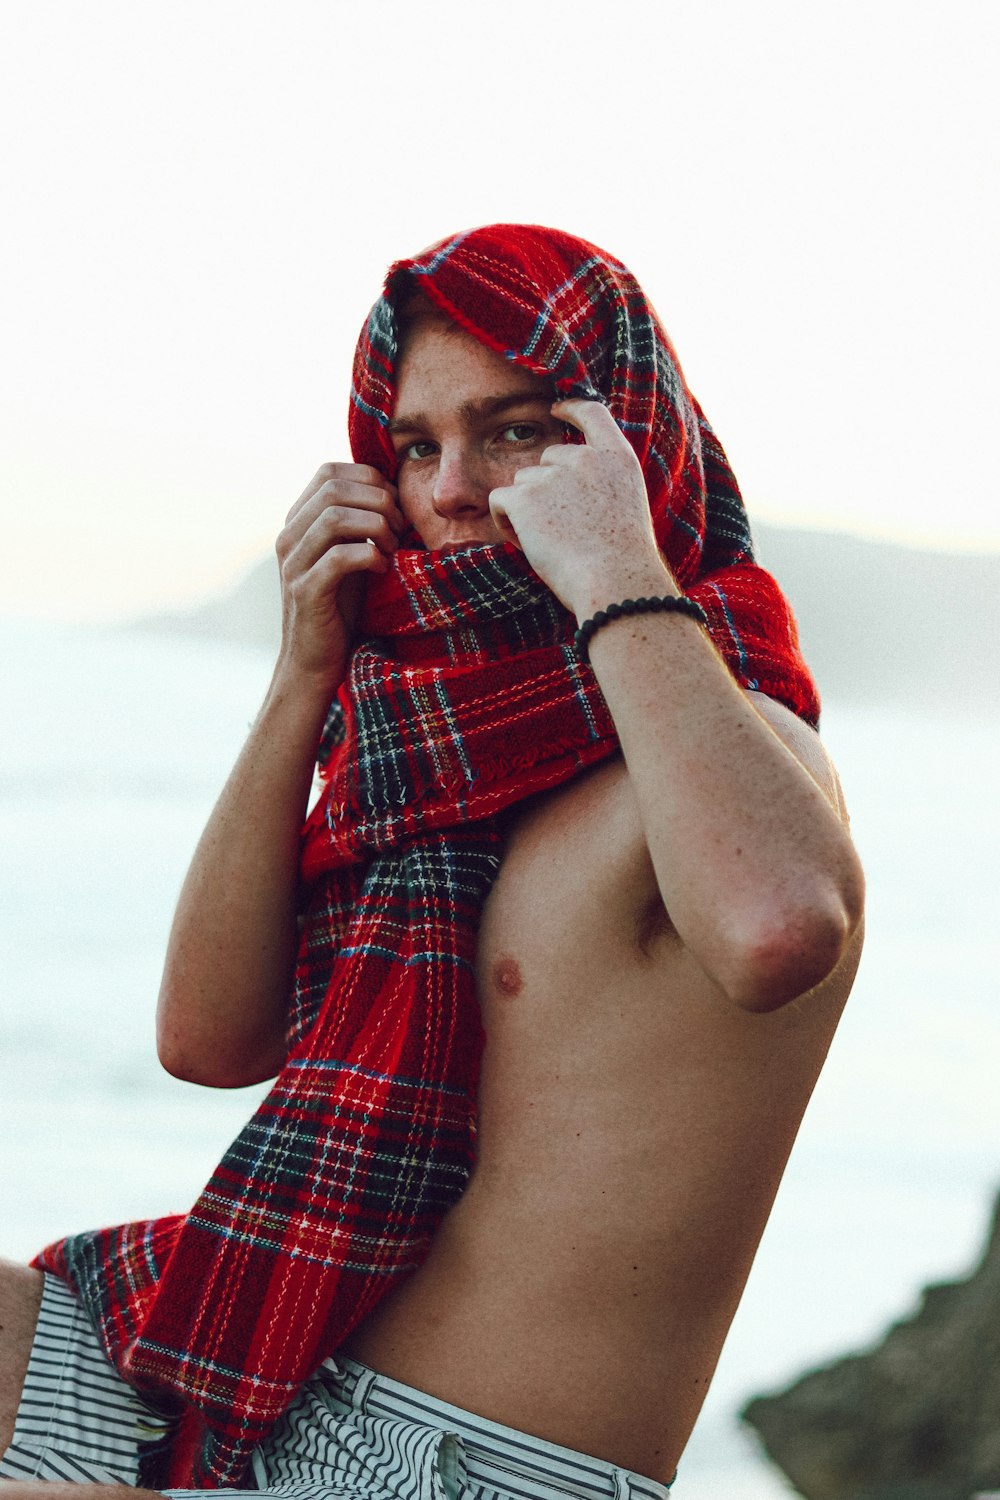 man covering his face with red and blue plaid textile